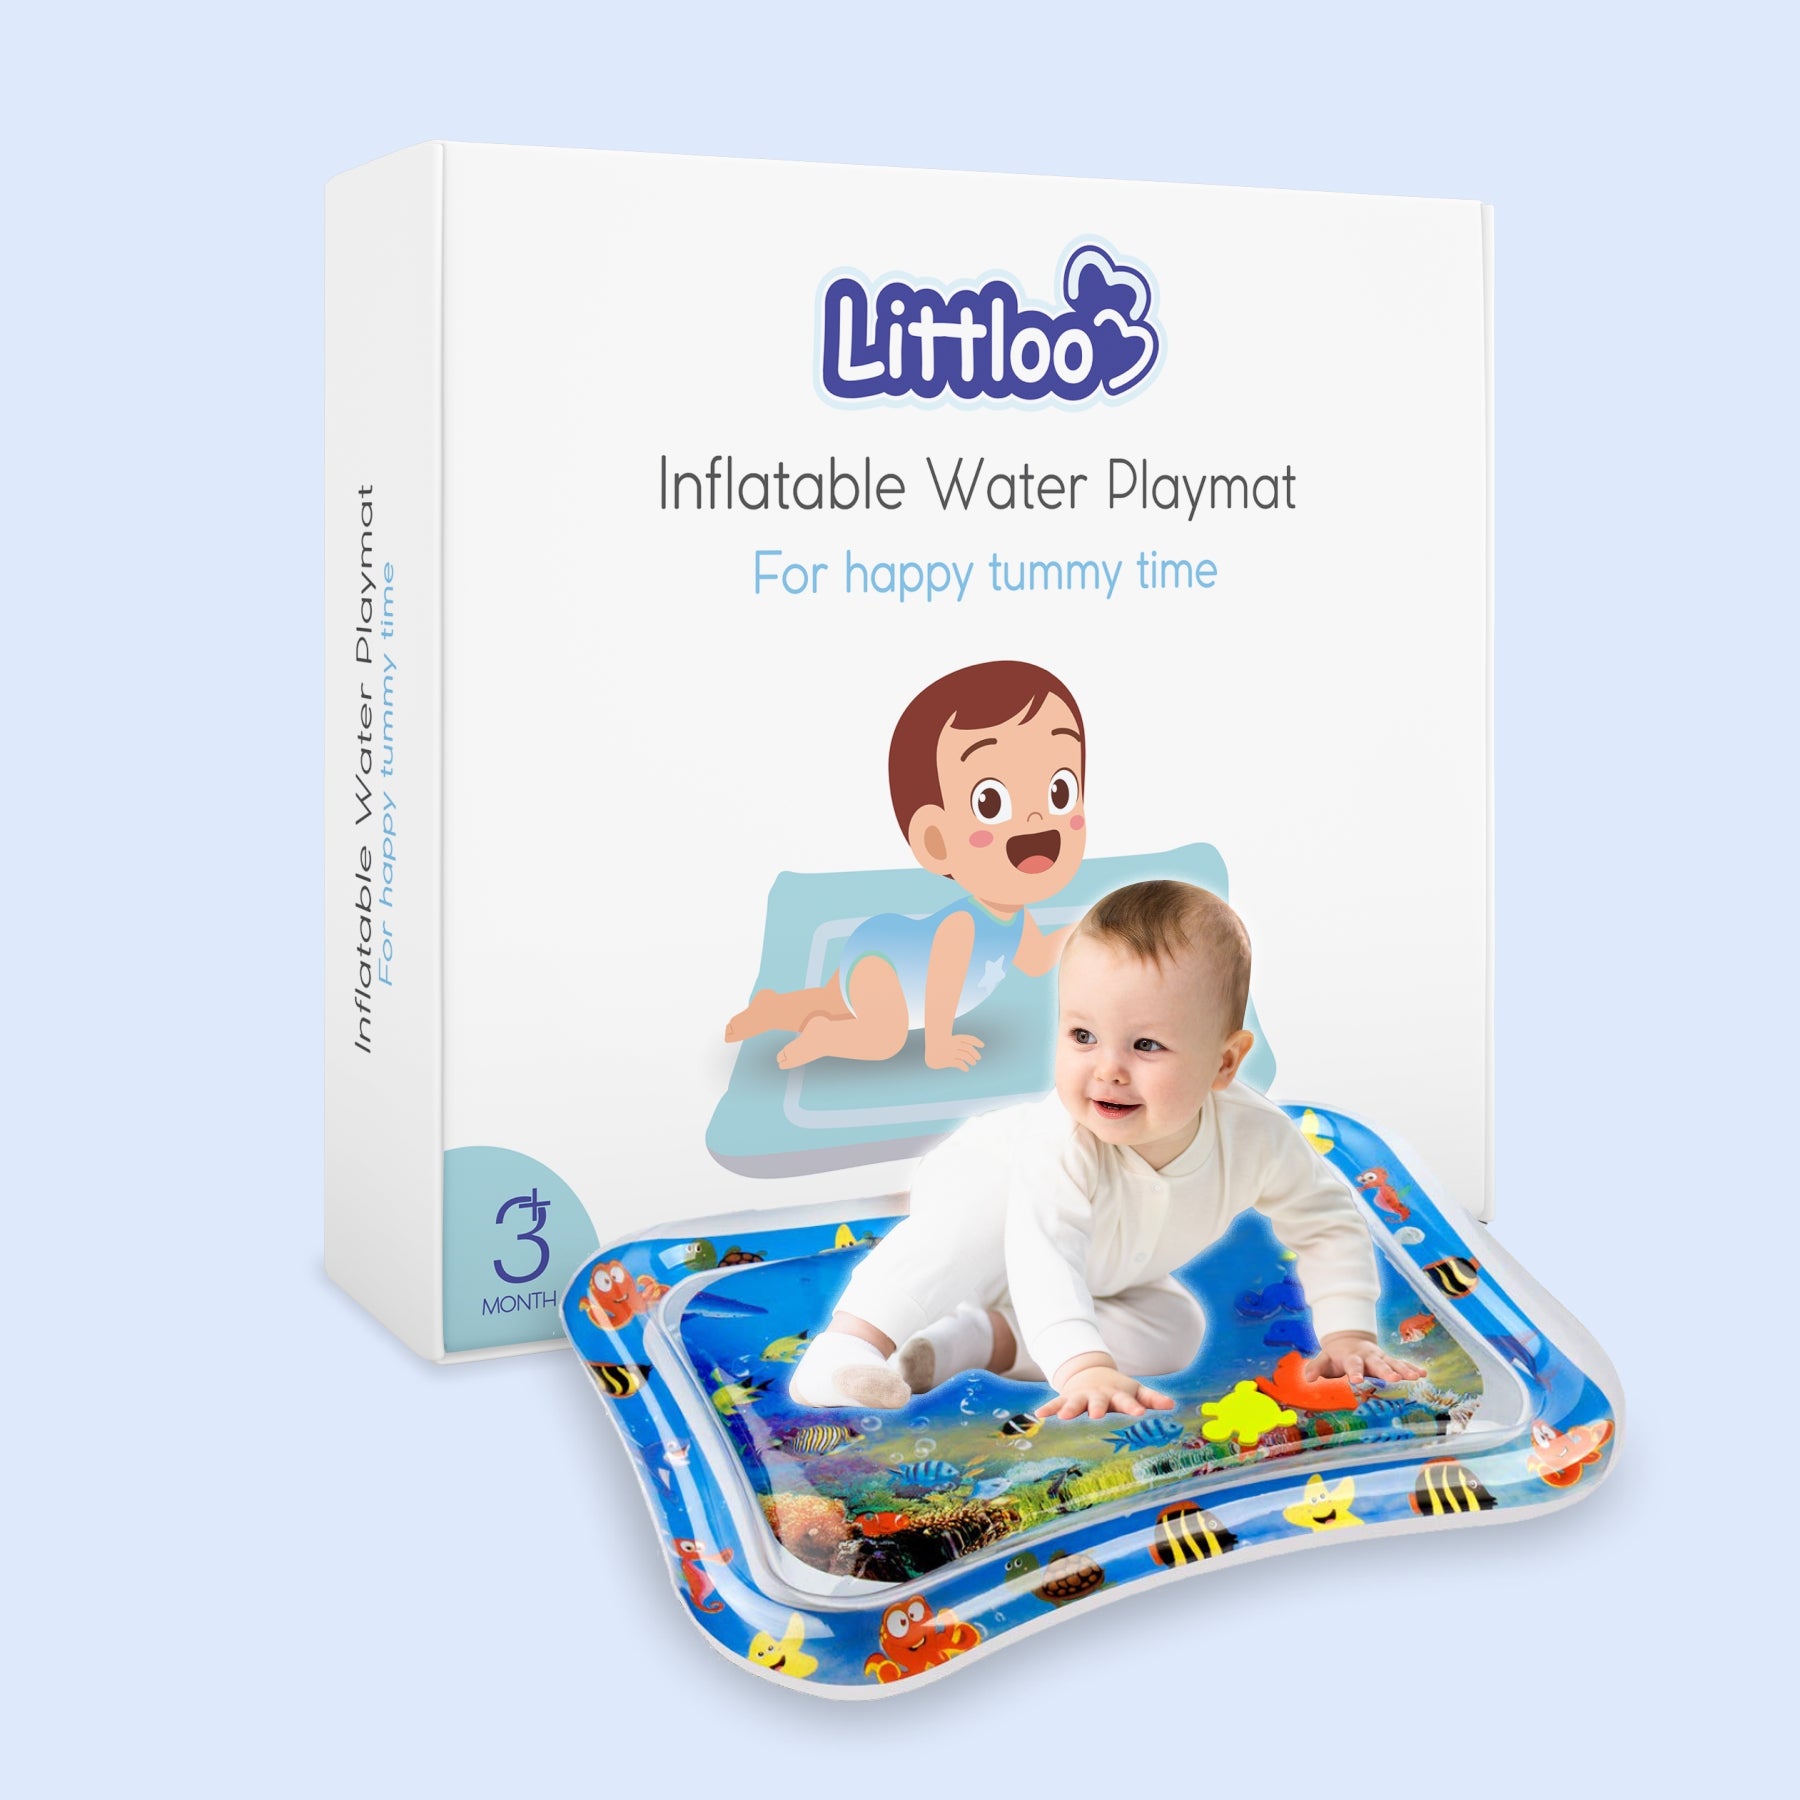 Inflatable Water Play Mat - Littloo